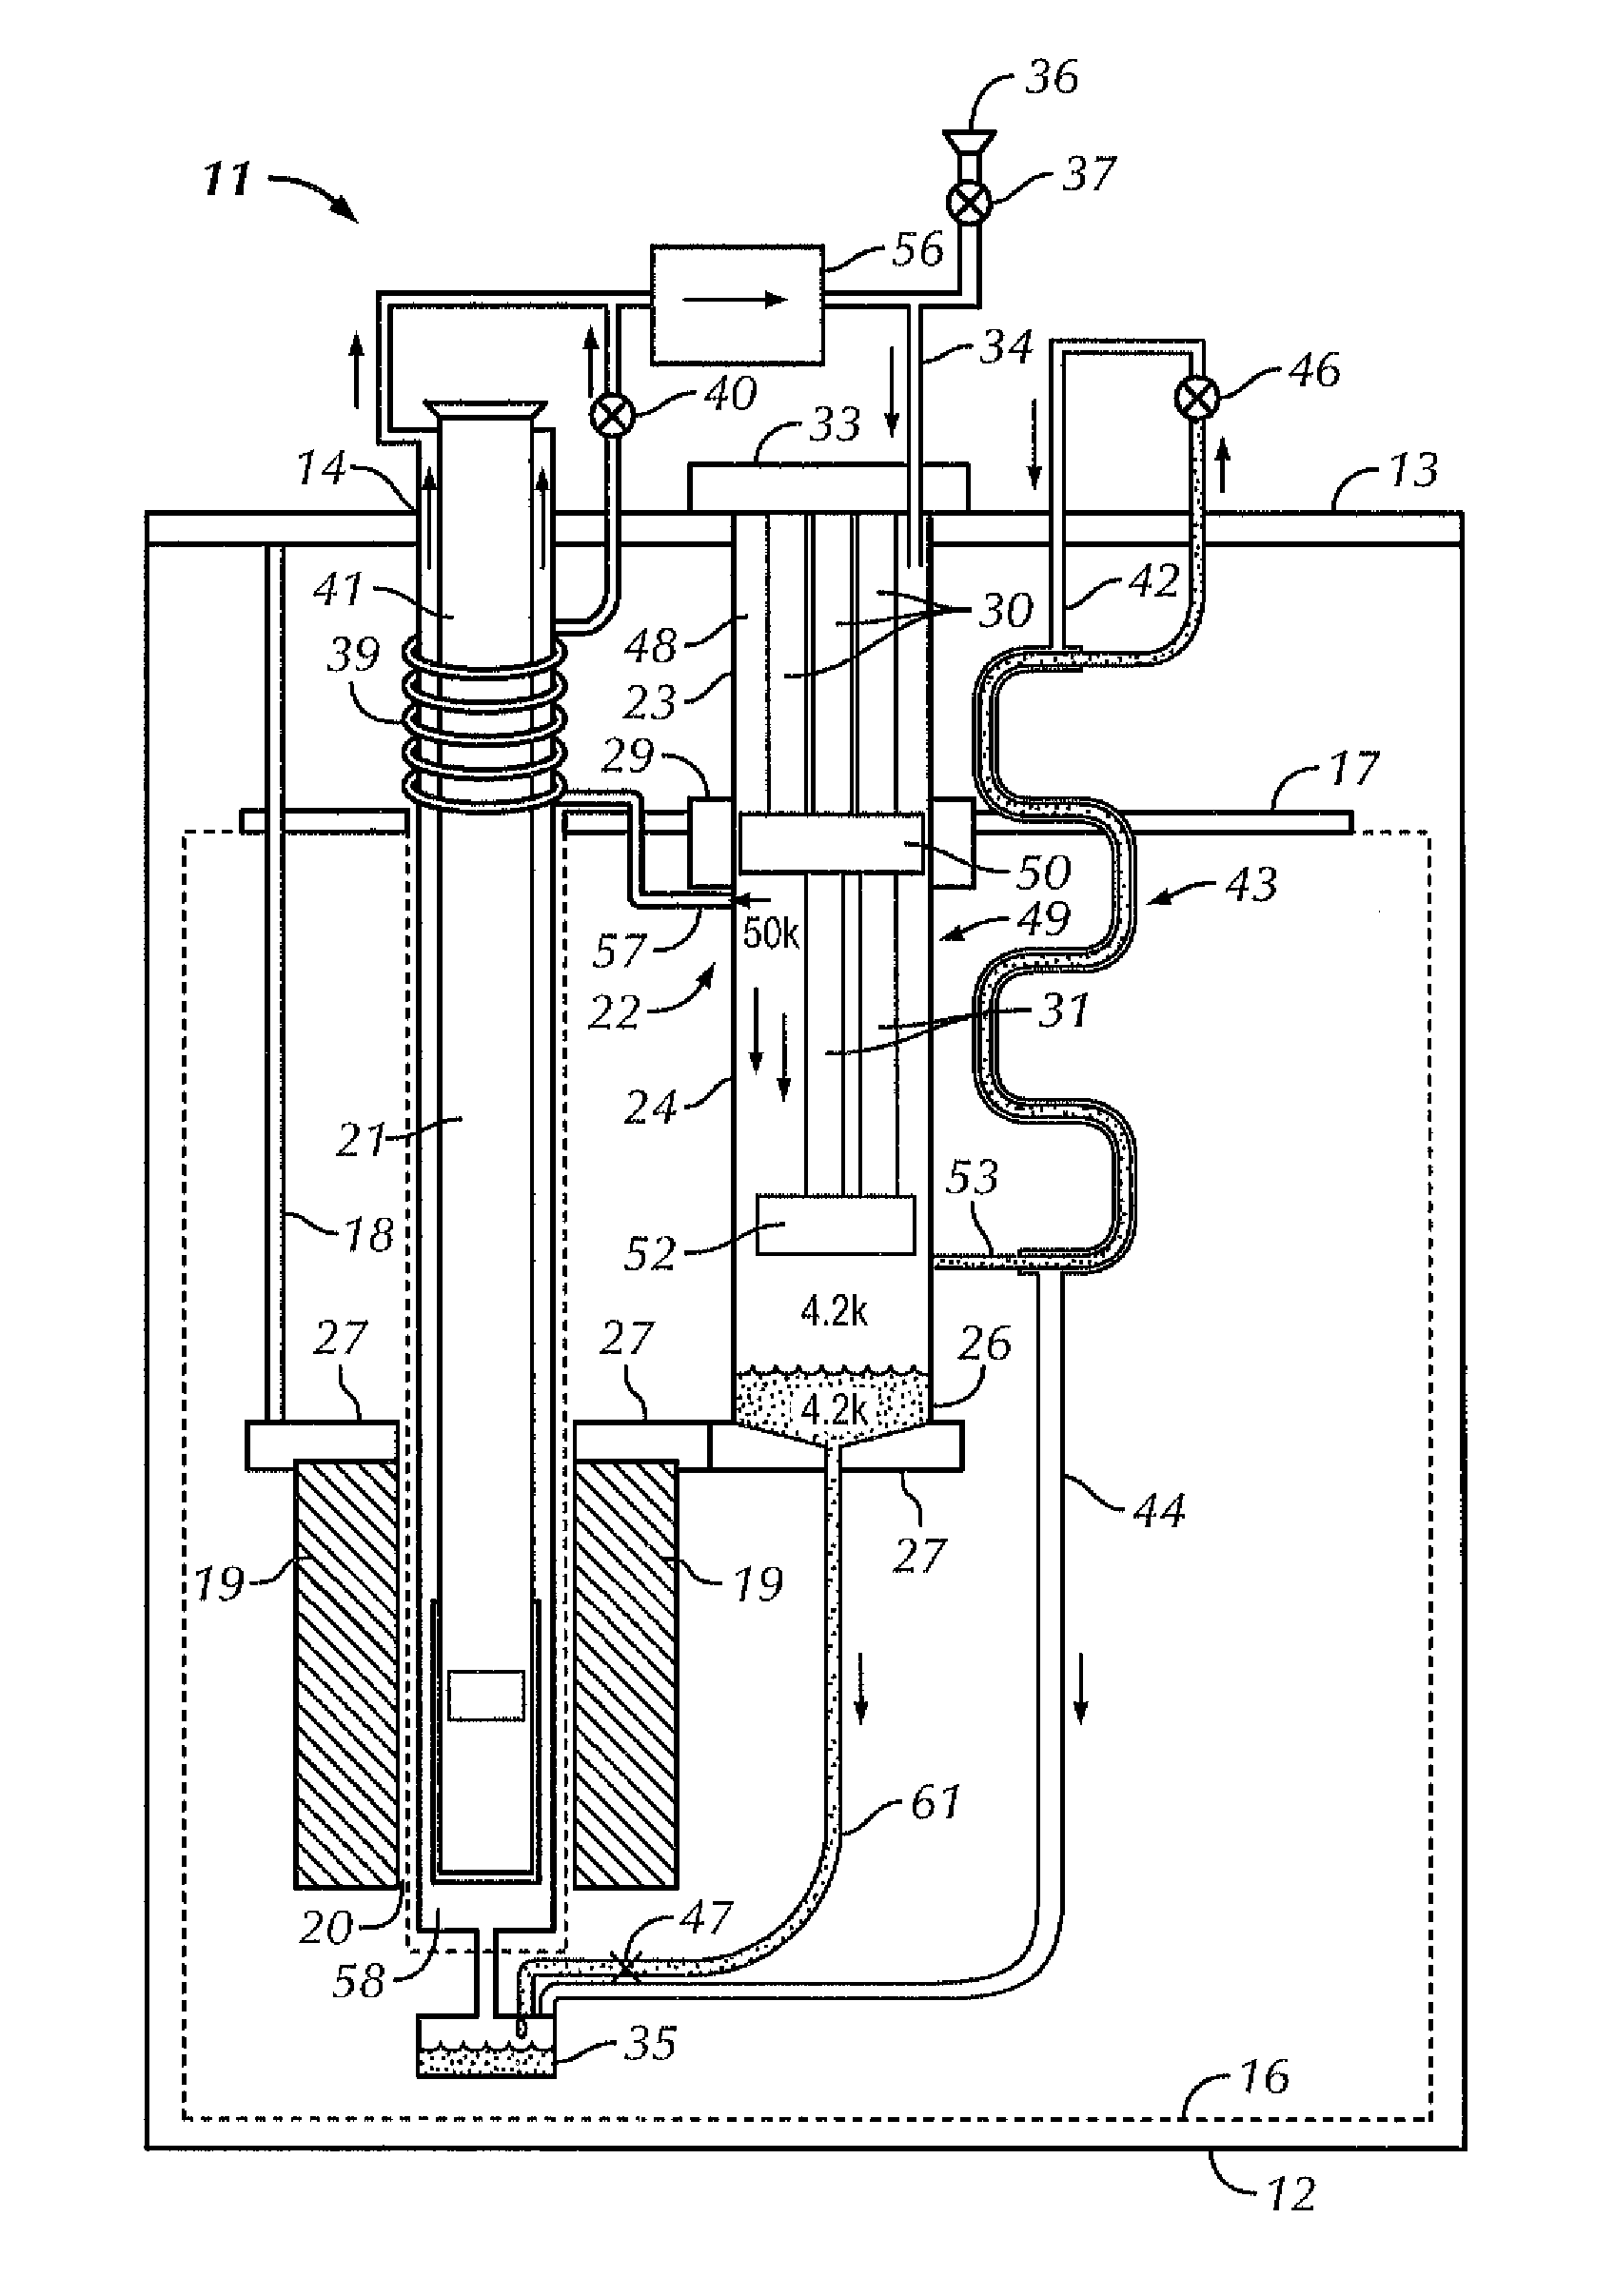 Method and apparatus for controlling temperature in a cryocooled cryostat using static and moving gas